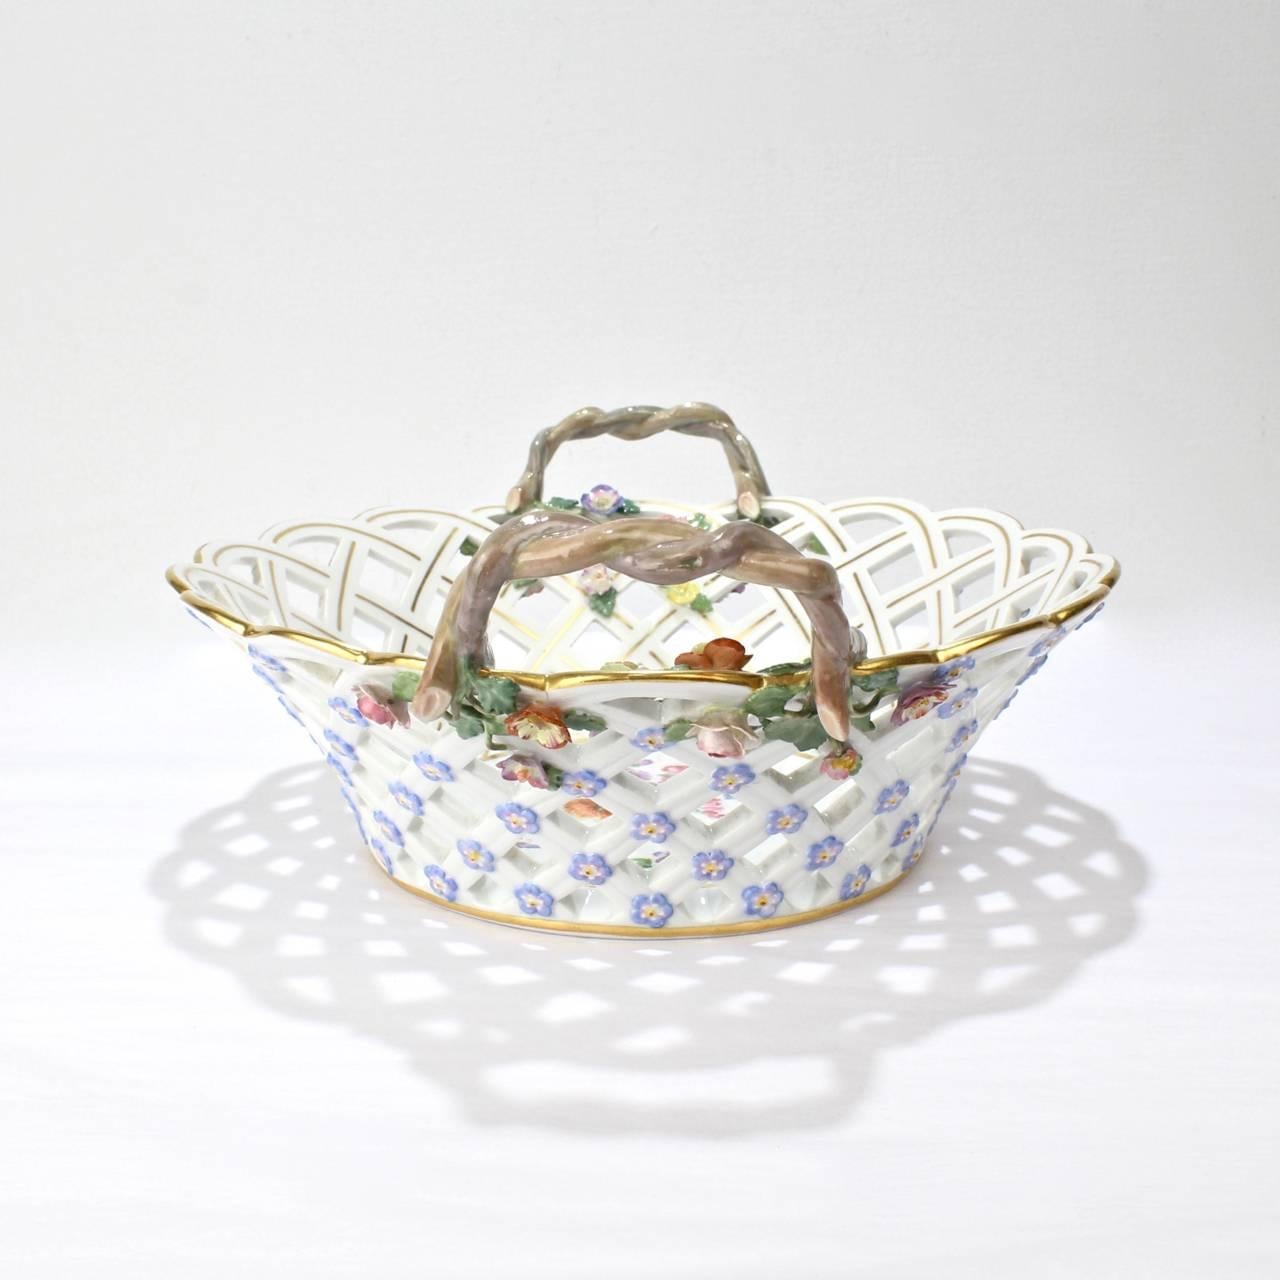 Antique 19th Century Meissen Porcelain Reticulated Fruit Basket with Flowers 1